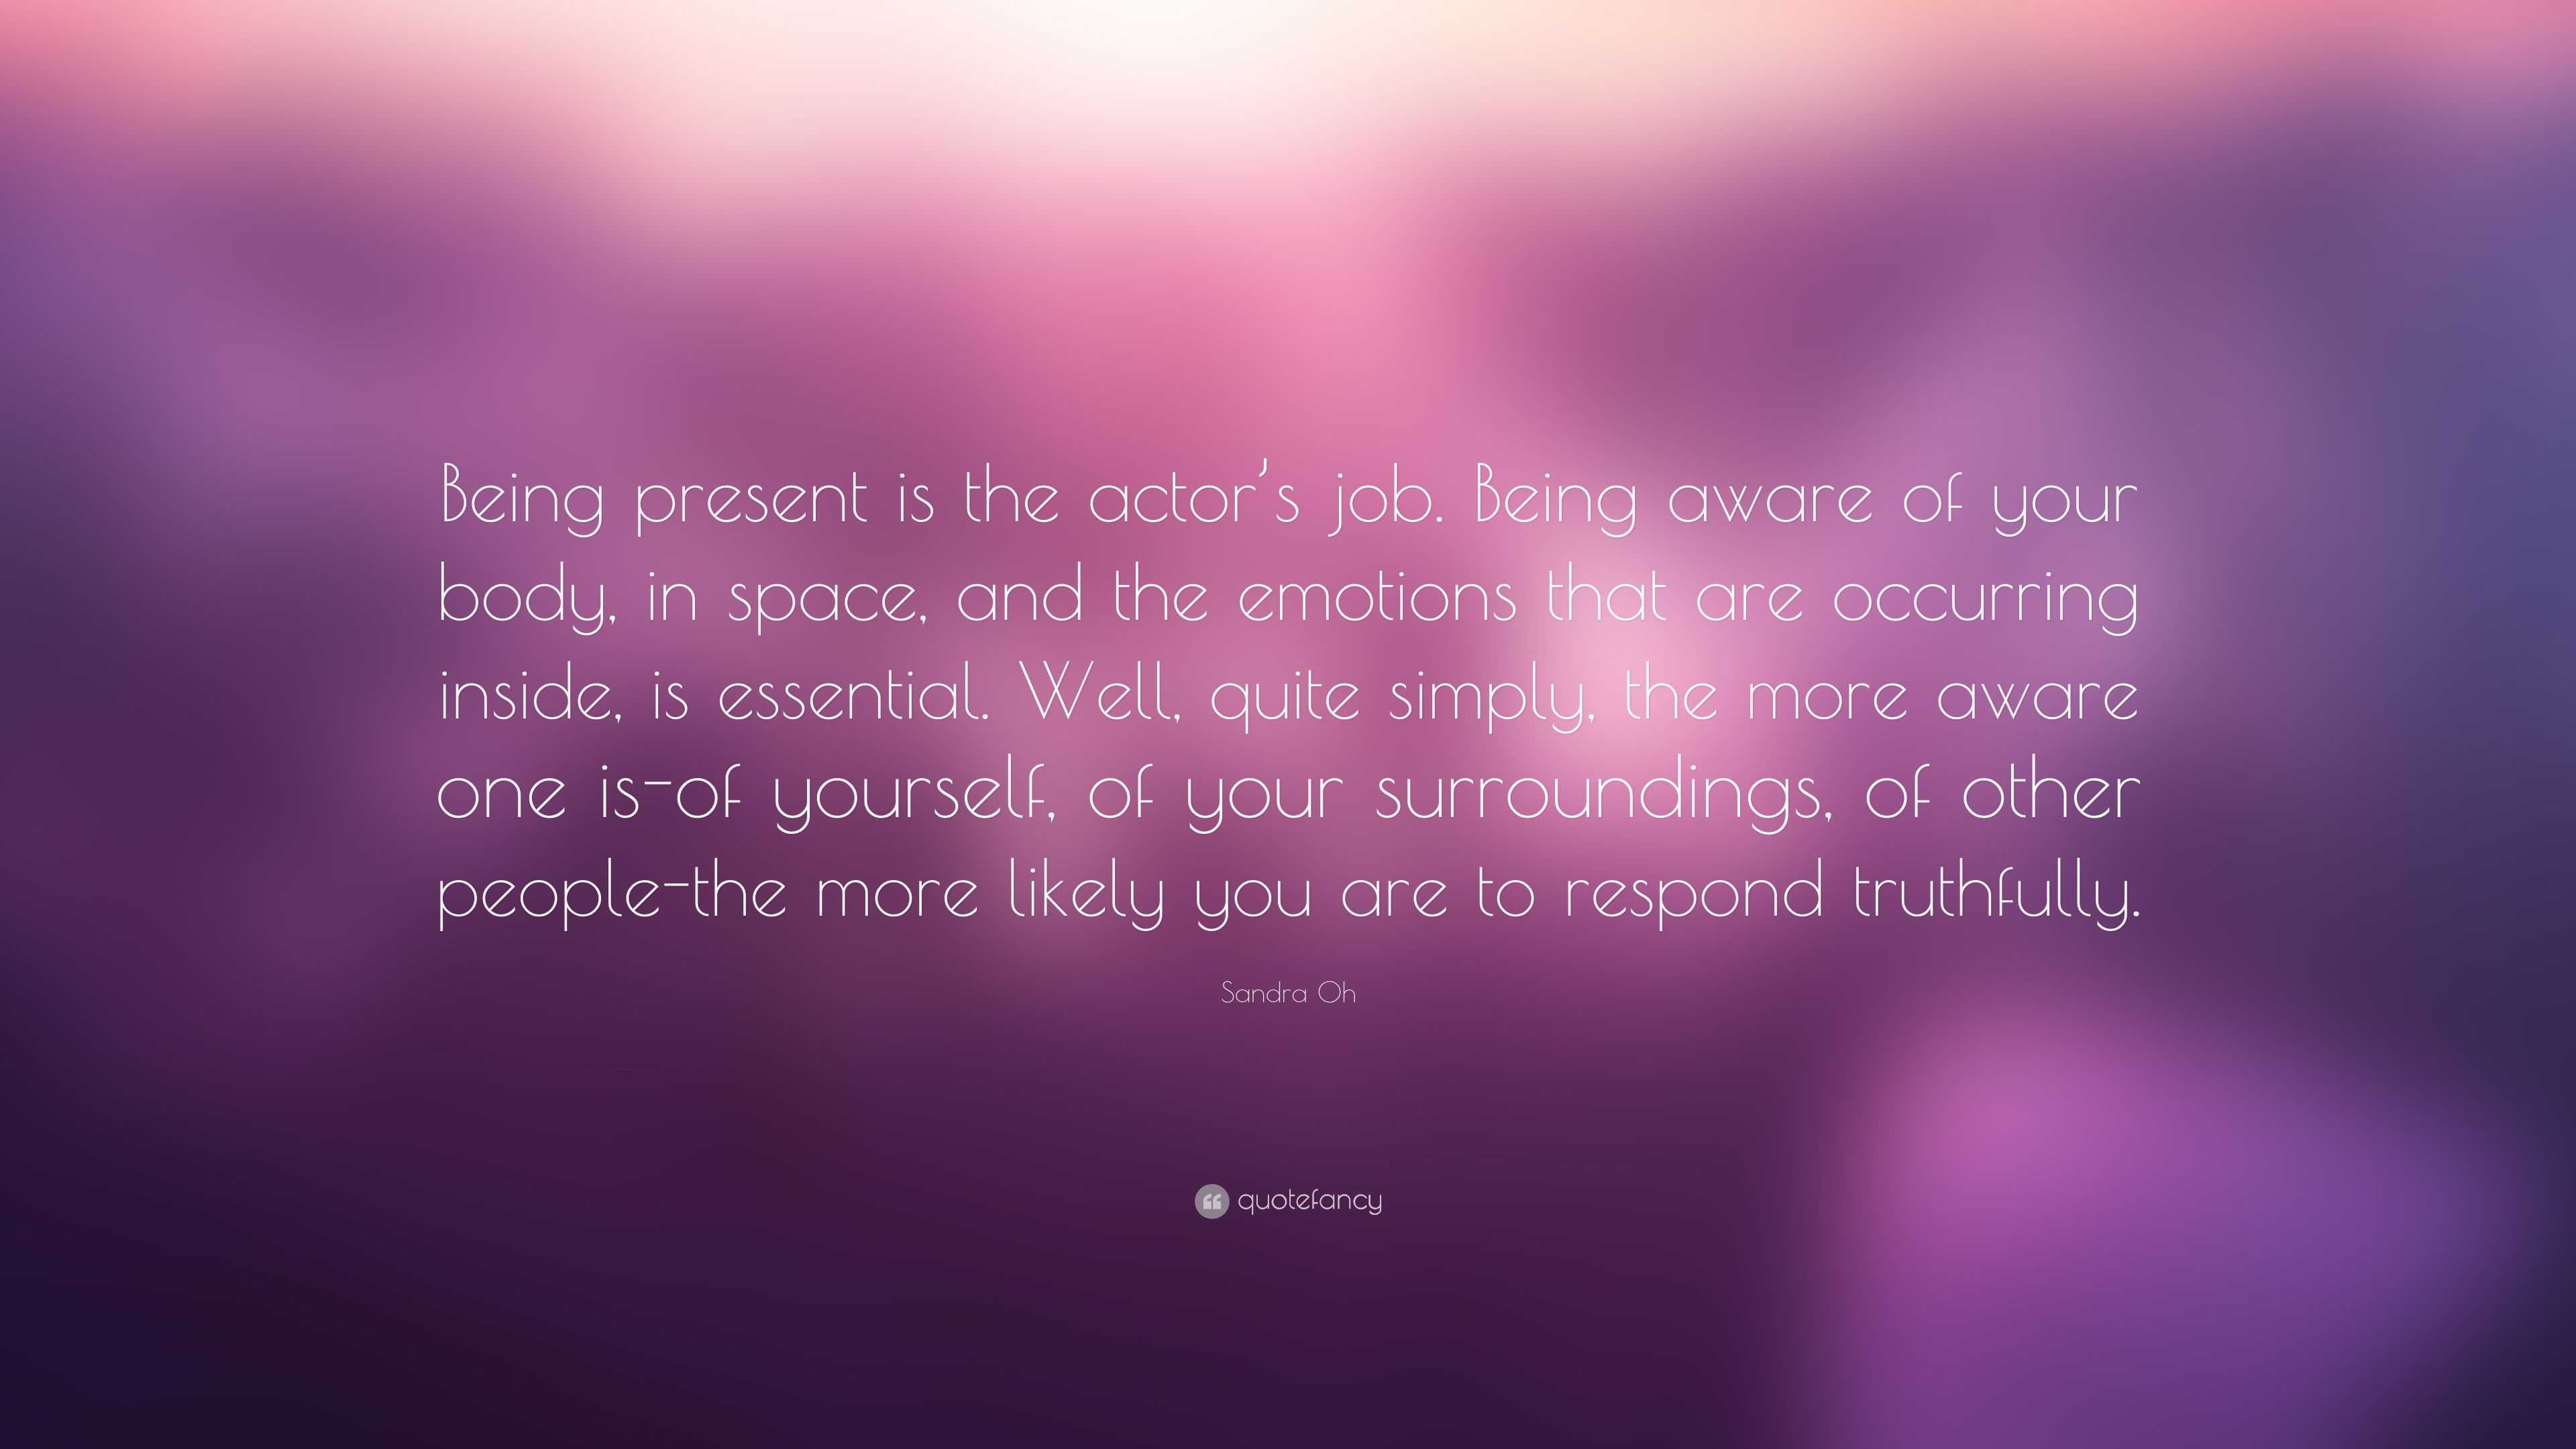 Sandra Oh Quote: “Being present is the actor’s job. Being aware of your ...